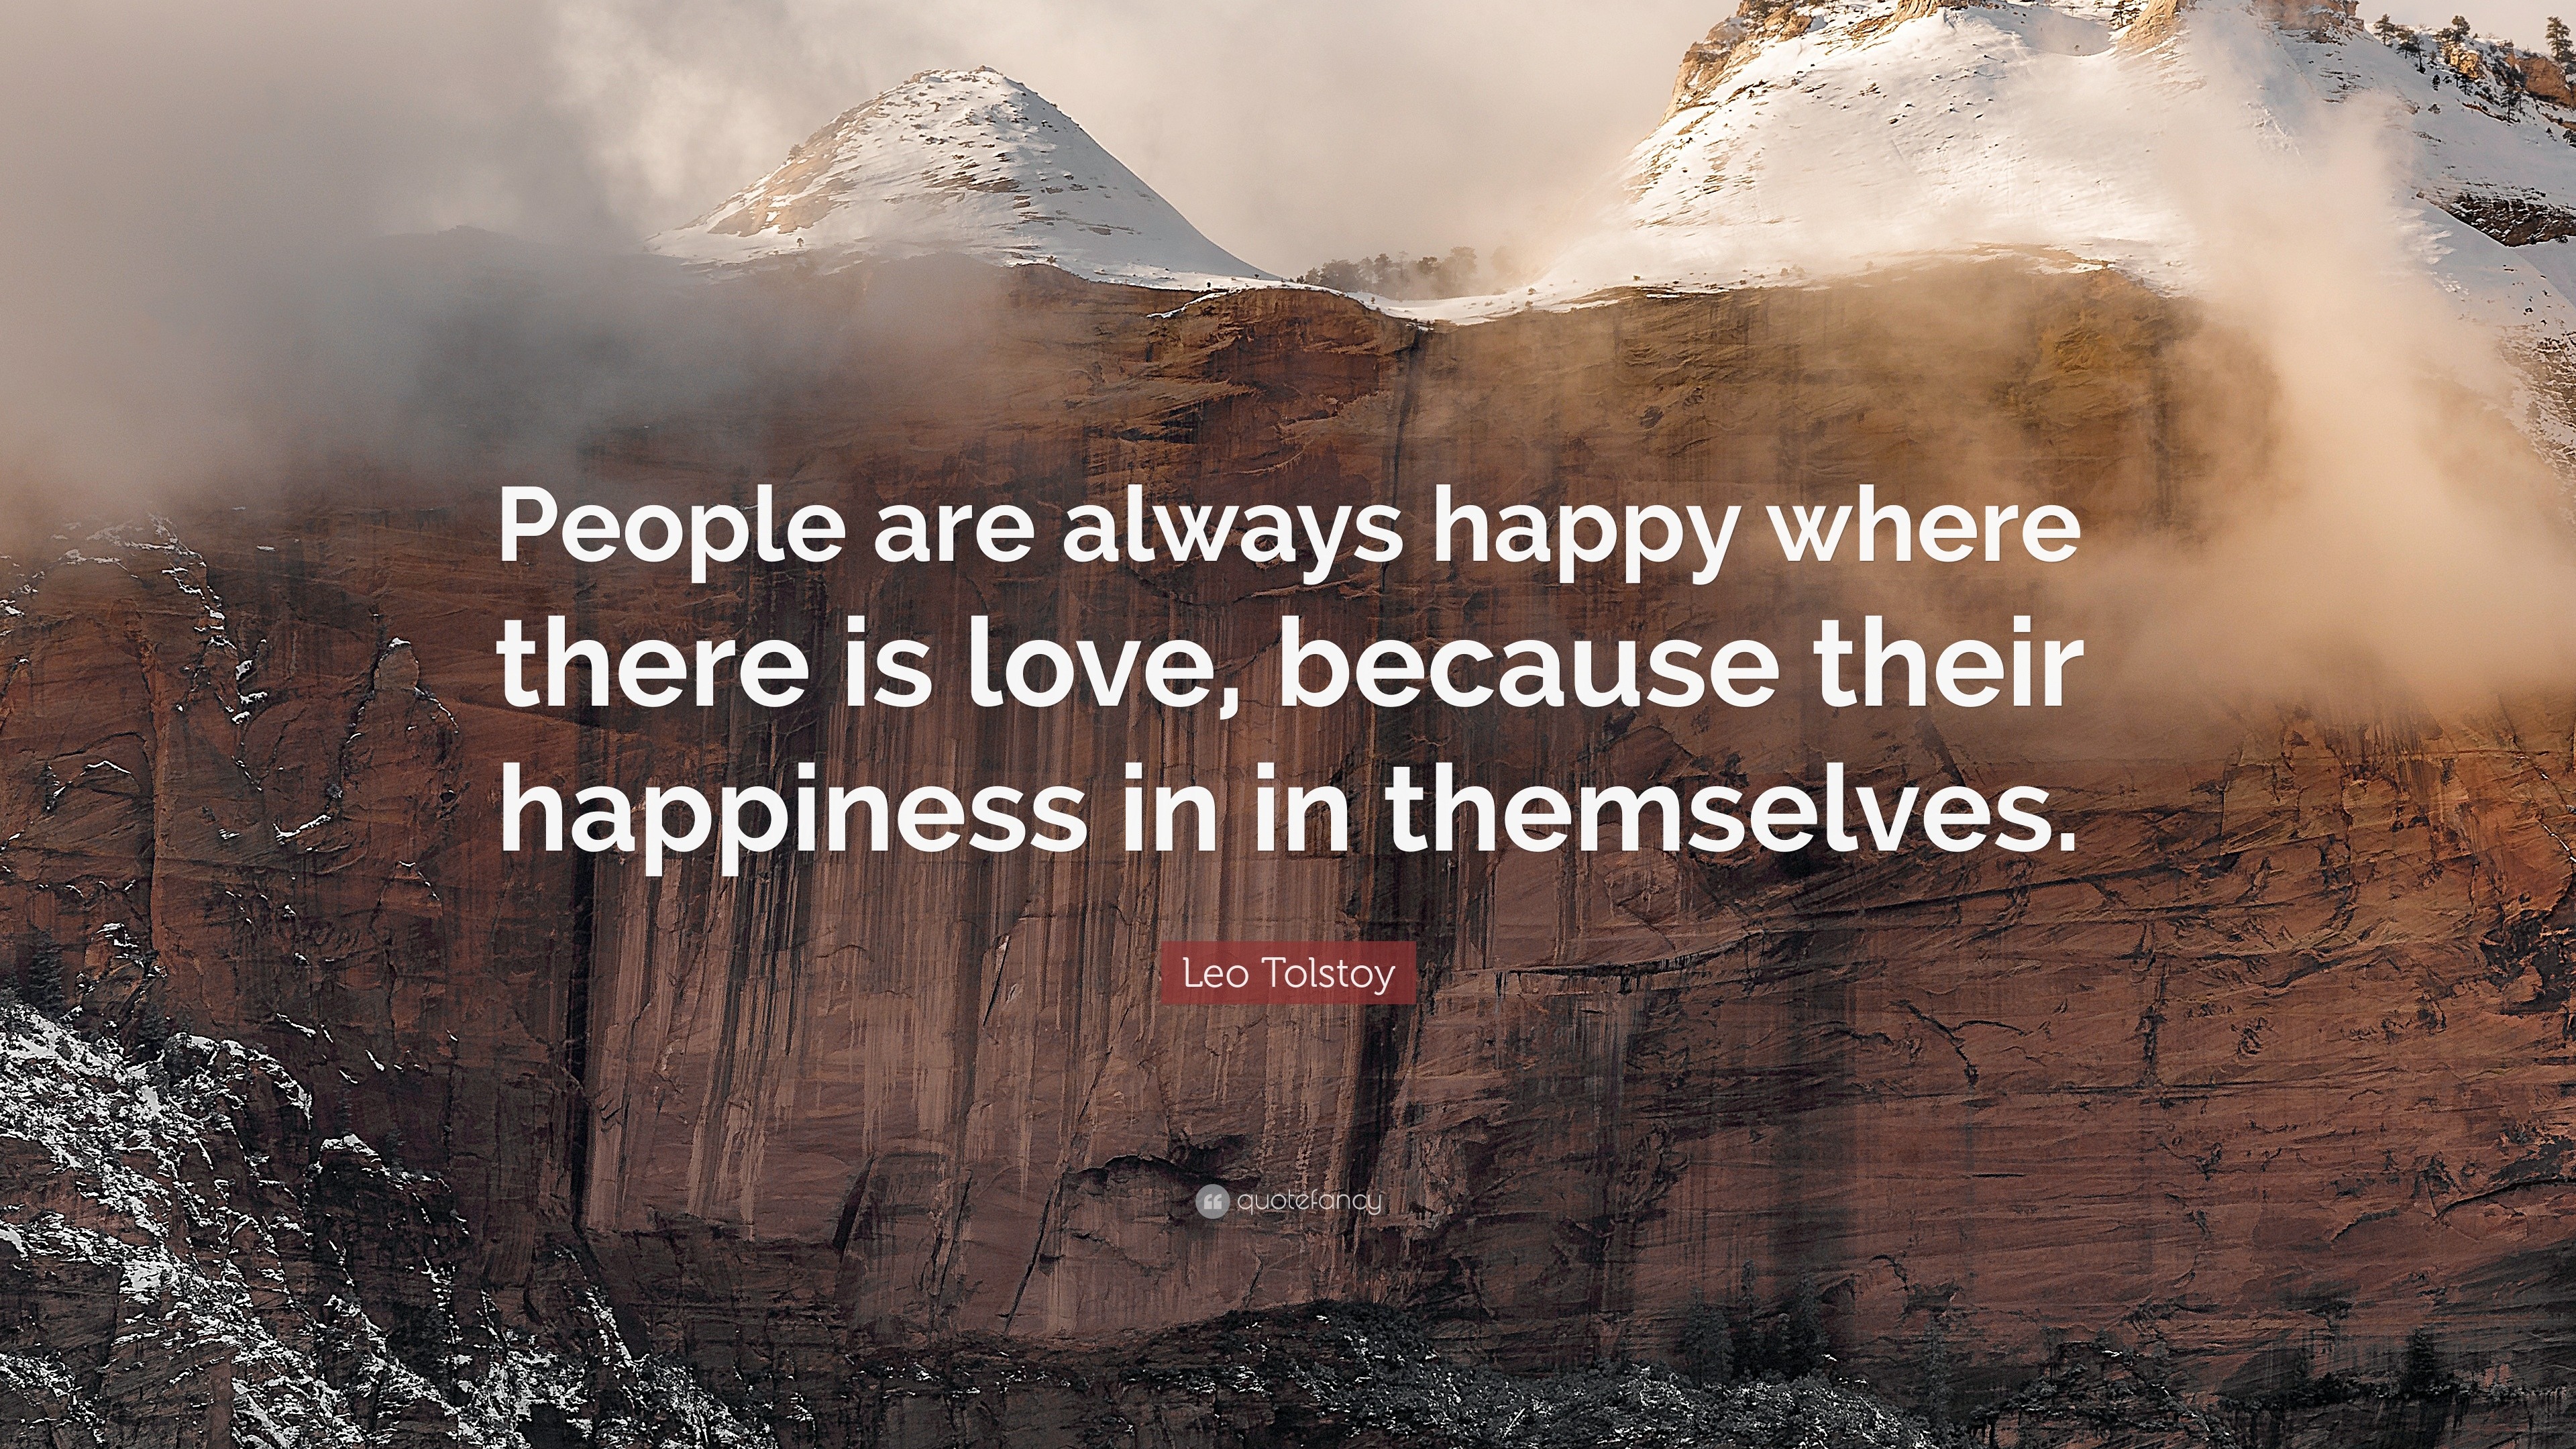 Leo Tolstoy Quote: “People are always happy where there is love ...